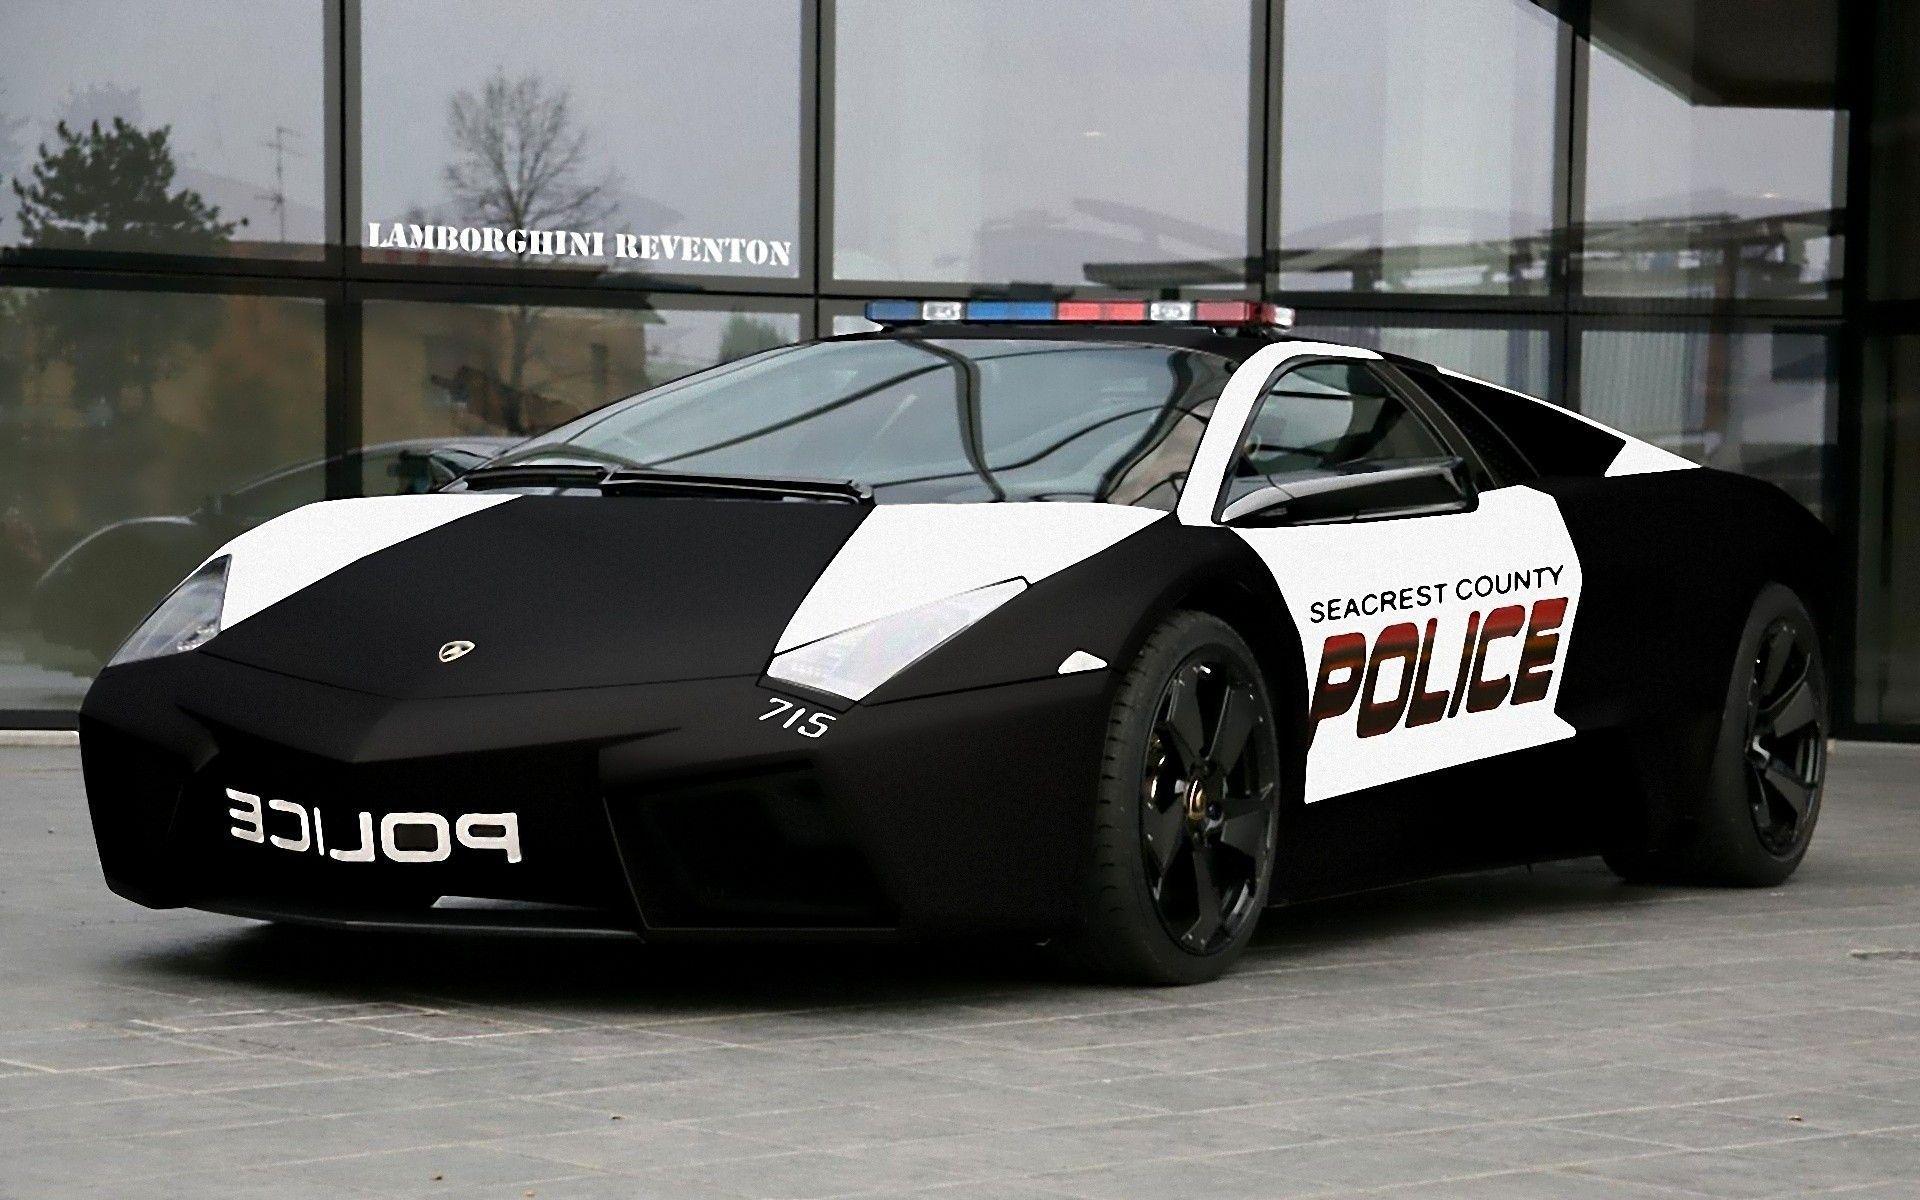 Police Car Wallpapers - Wallpaper Cave